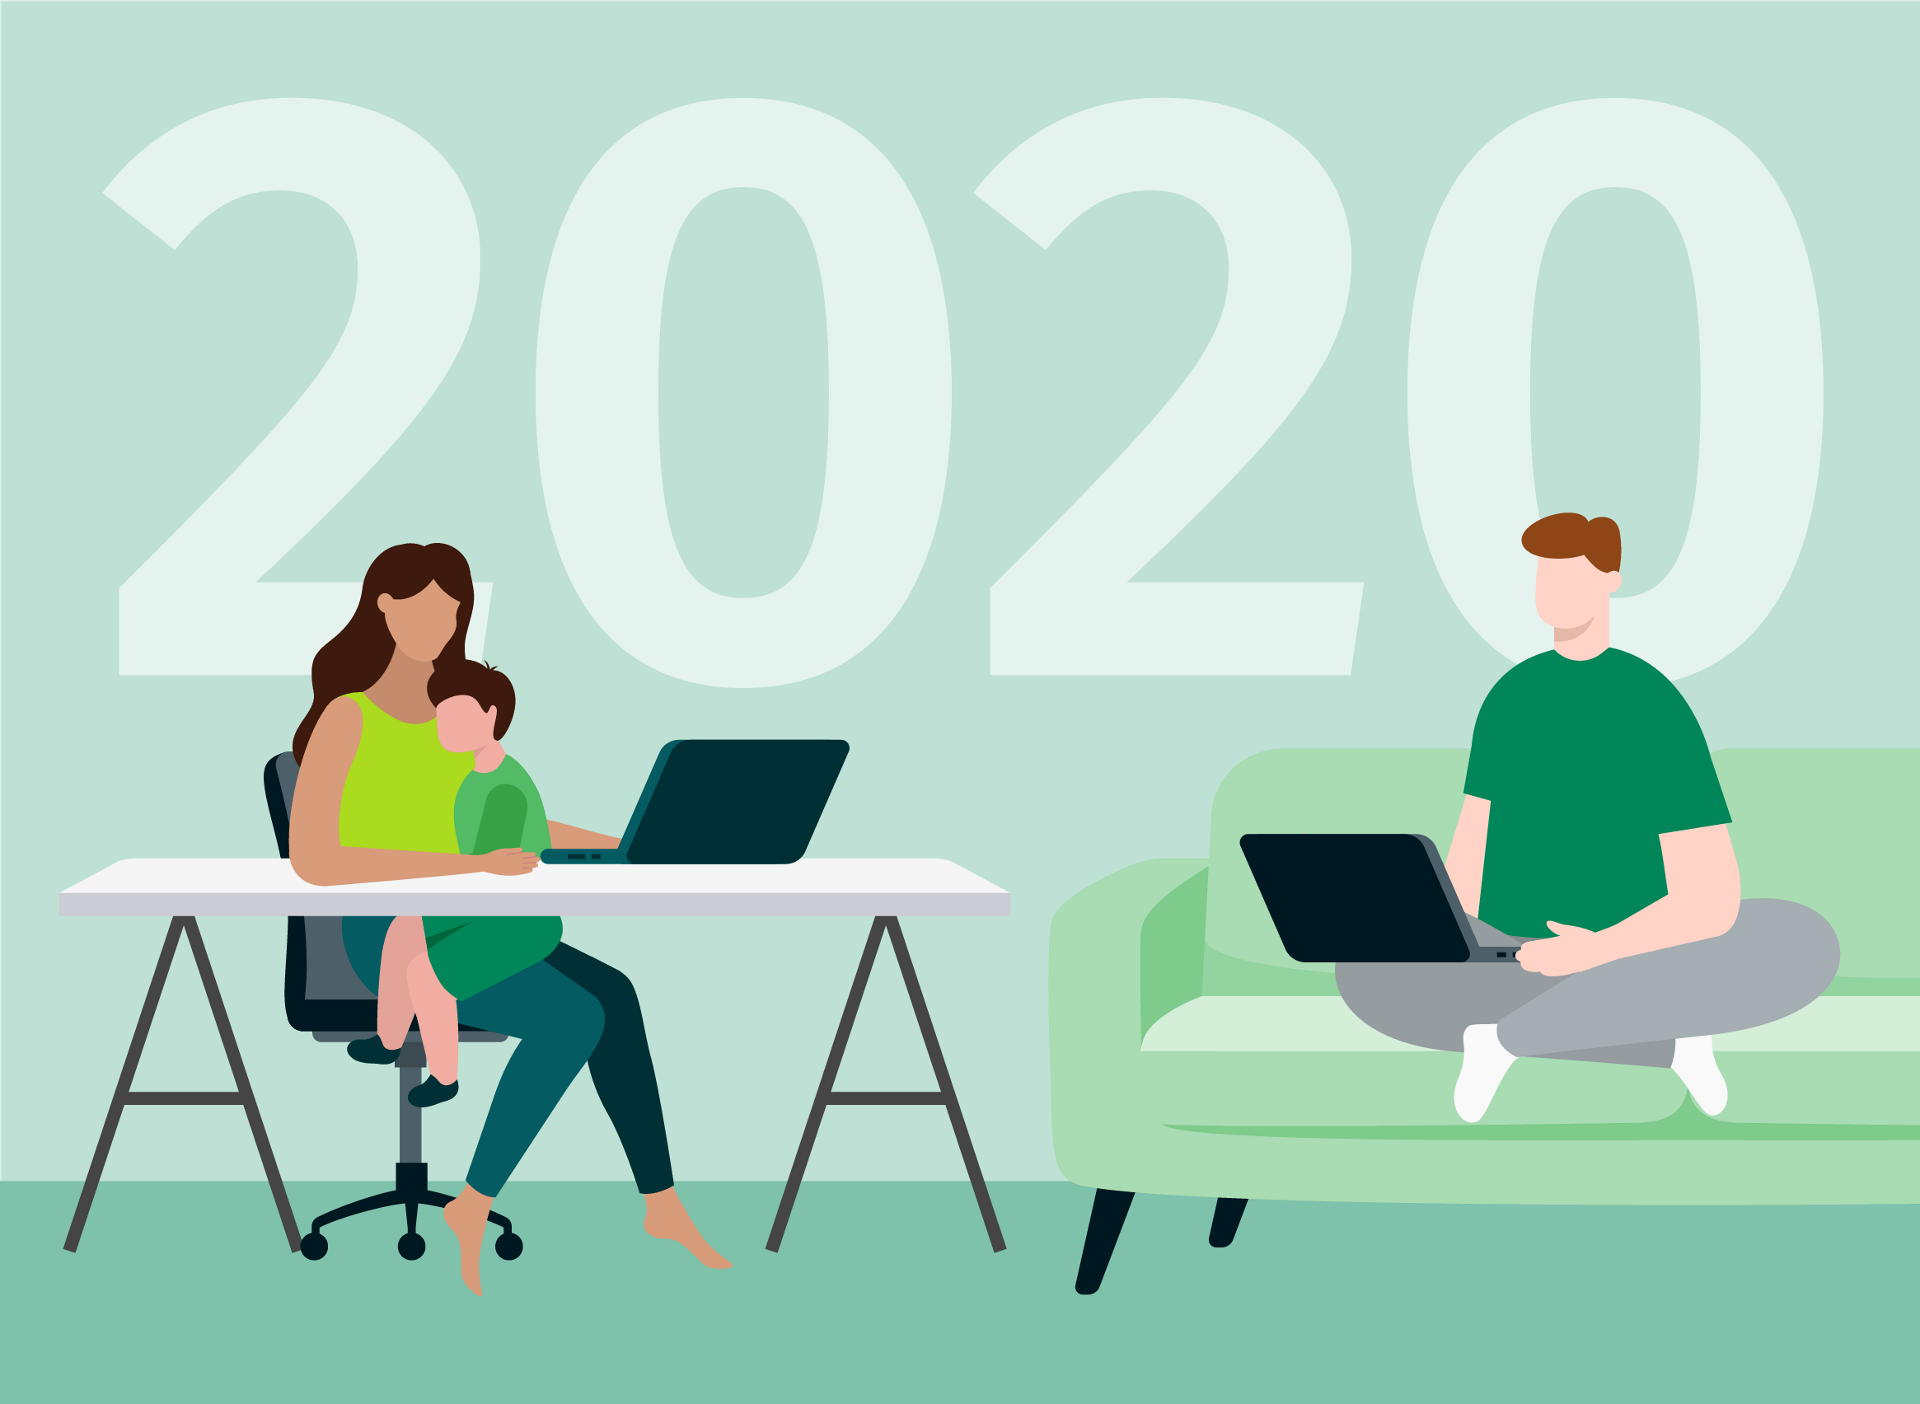 illustration of woman working on laptop and holding child, man sitting on a couch working on laptop in 2020